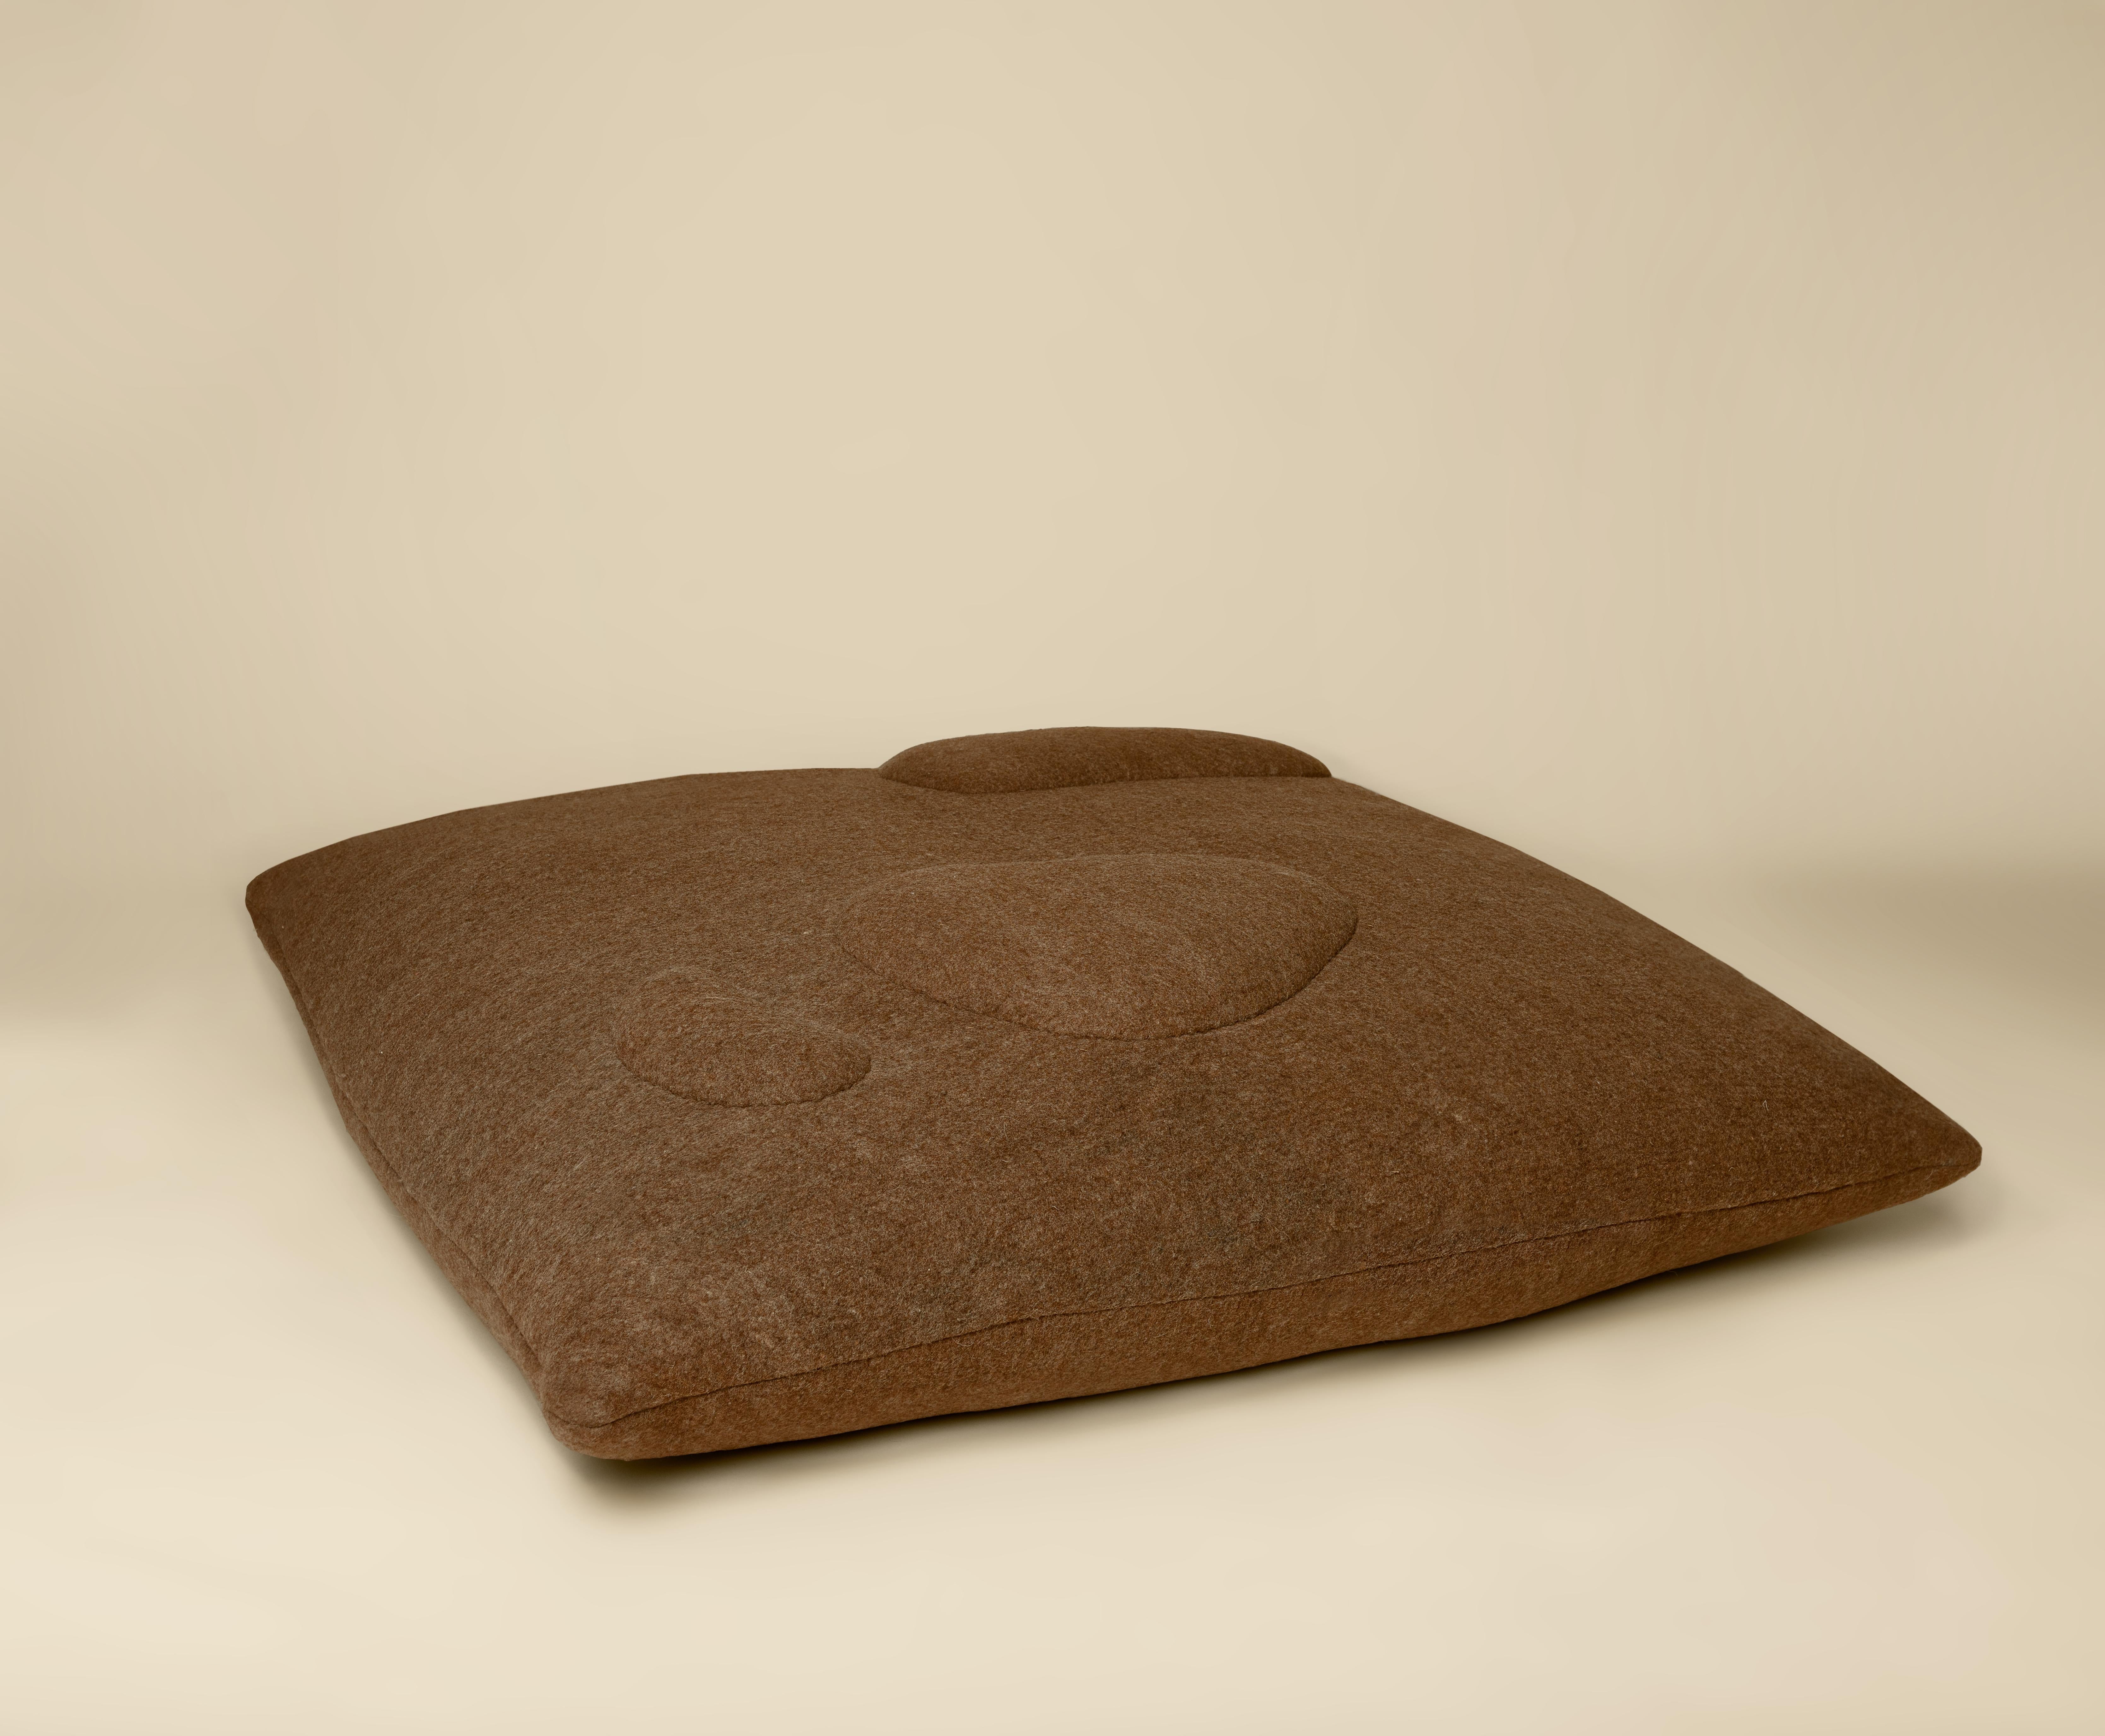 Sheep Floor Pillow designed by Studio Ahead in a collaboration with JG SWITZER. 

Textured like stones smoothed by water the felted wool fabric is a mix of local fleeces and silk/wool blends. Fabric designed in collaboration JG SWITZER using a